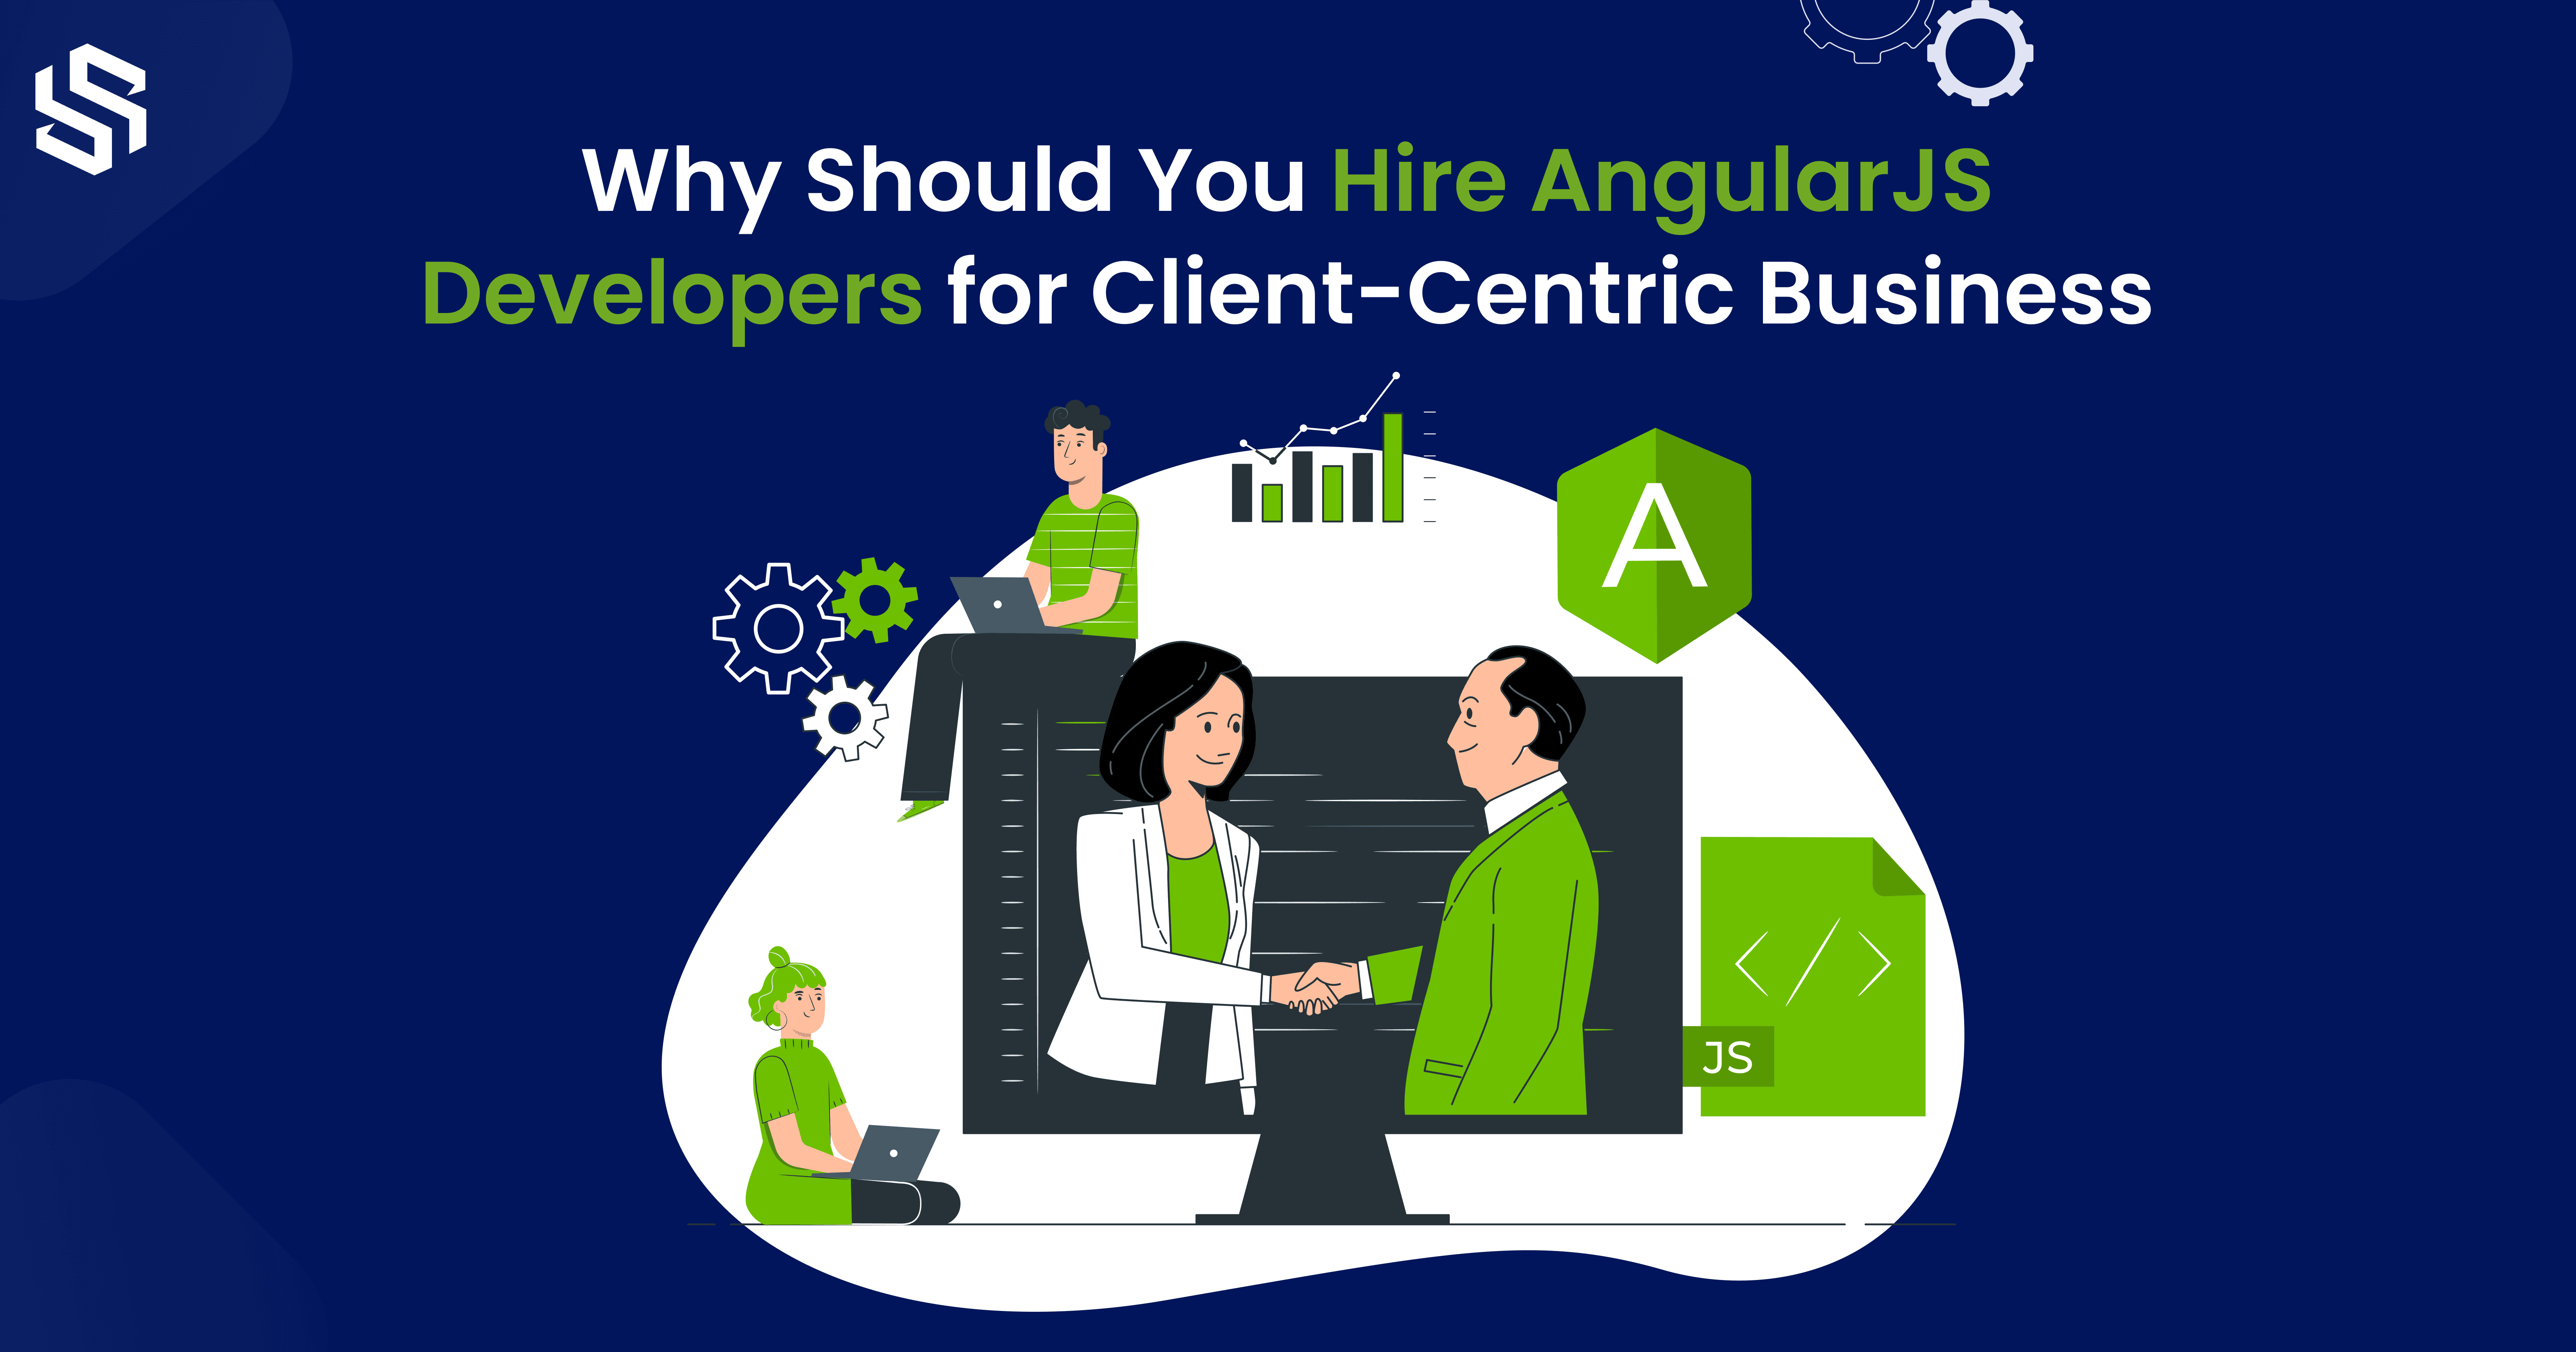 Why Should You Hire AngularJS Developers for Client-Centric Business